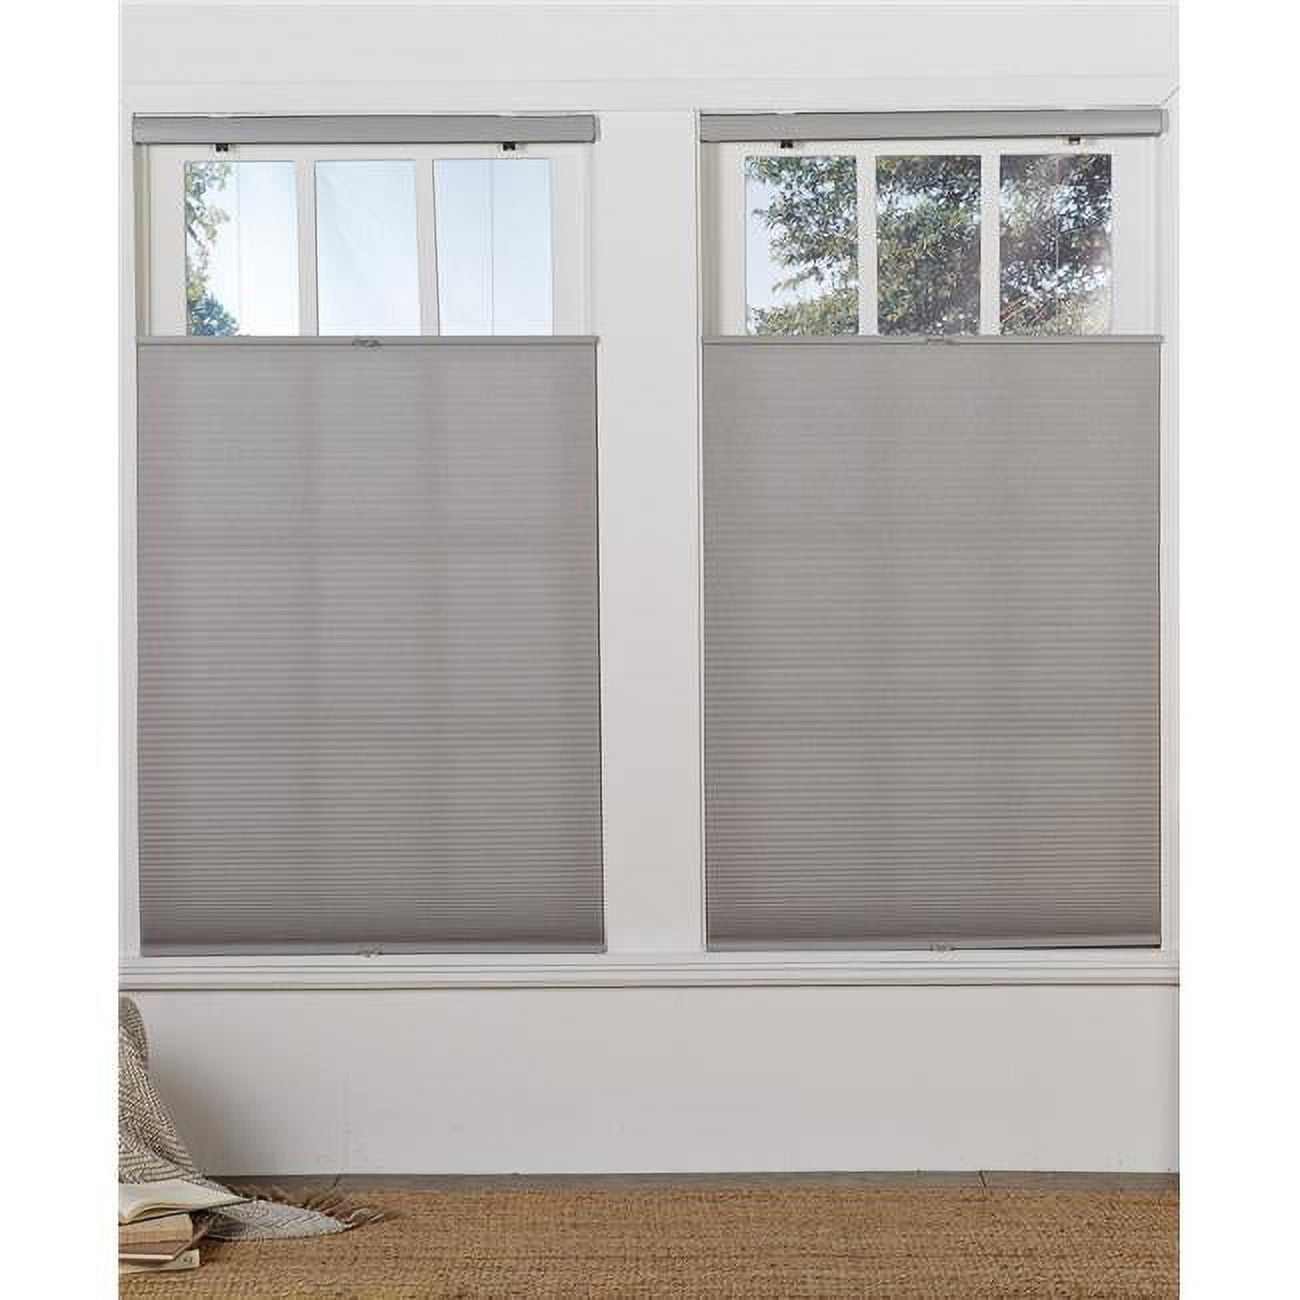 Safe Styles UBG325X72LG Cordless Light Filtering Top Down Bottom Up Shade, Gray Cloud - 32.5 x 72 in.